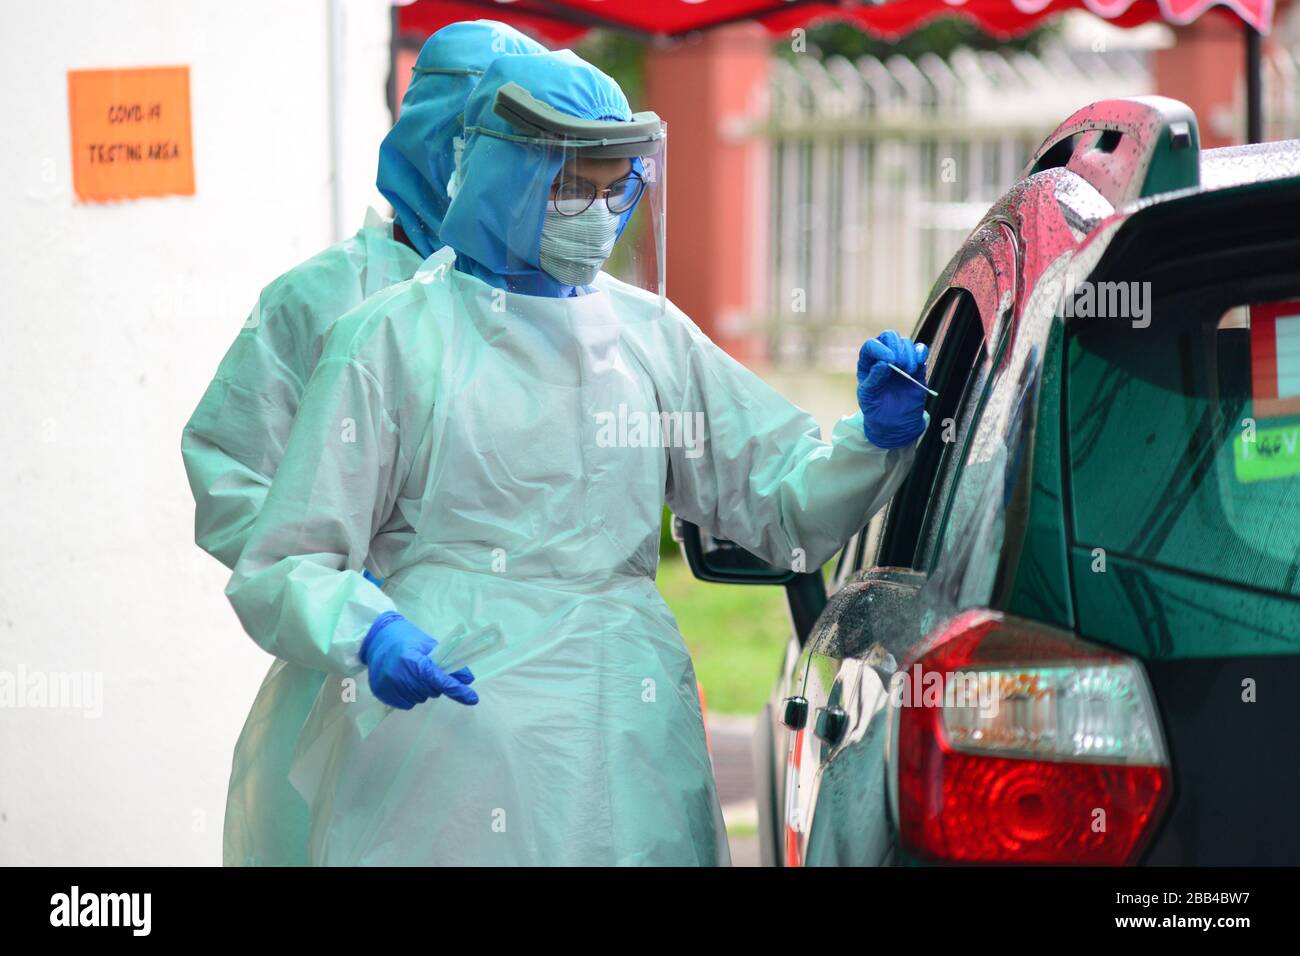 Kuala Lumpur, Malaysia. 30th Mar, 2020. A medical staff member takes the sample from a drive-through resident at a COVID-19 testing area of a hospital in Damansara near Kuala Lumpur, Malaysia, March 30, 2020. A total of 37 people have died of the COVID-19 in Malaysia as of Monday with 156 newly confirmed cases, bringing the total to 2,626, said the Health Ministry. Credit: Chong Voon Chung/Xinhua/Alamy Live News Stock Photo